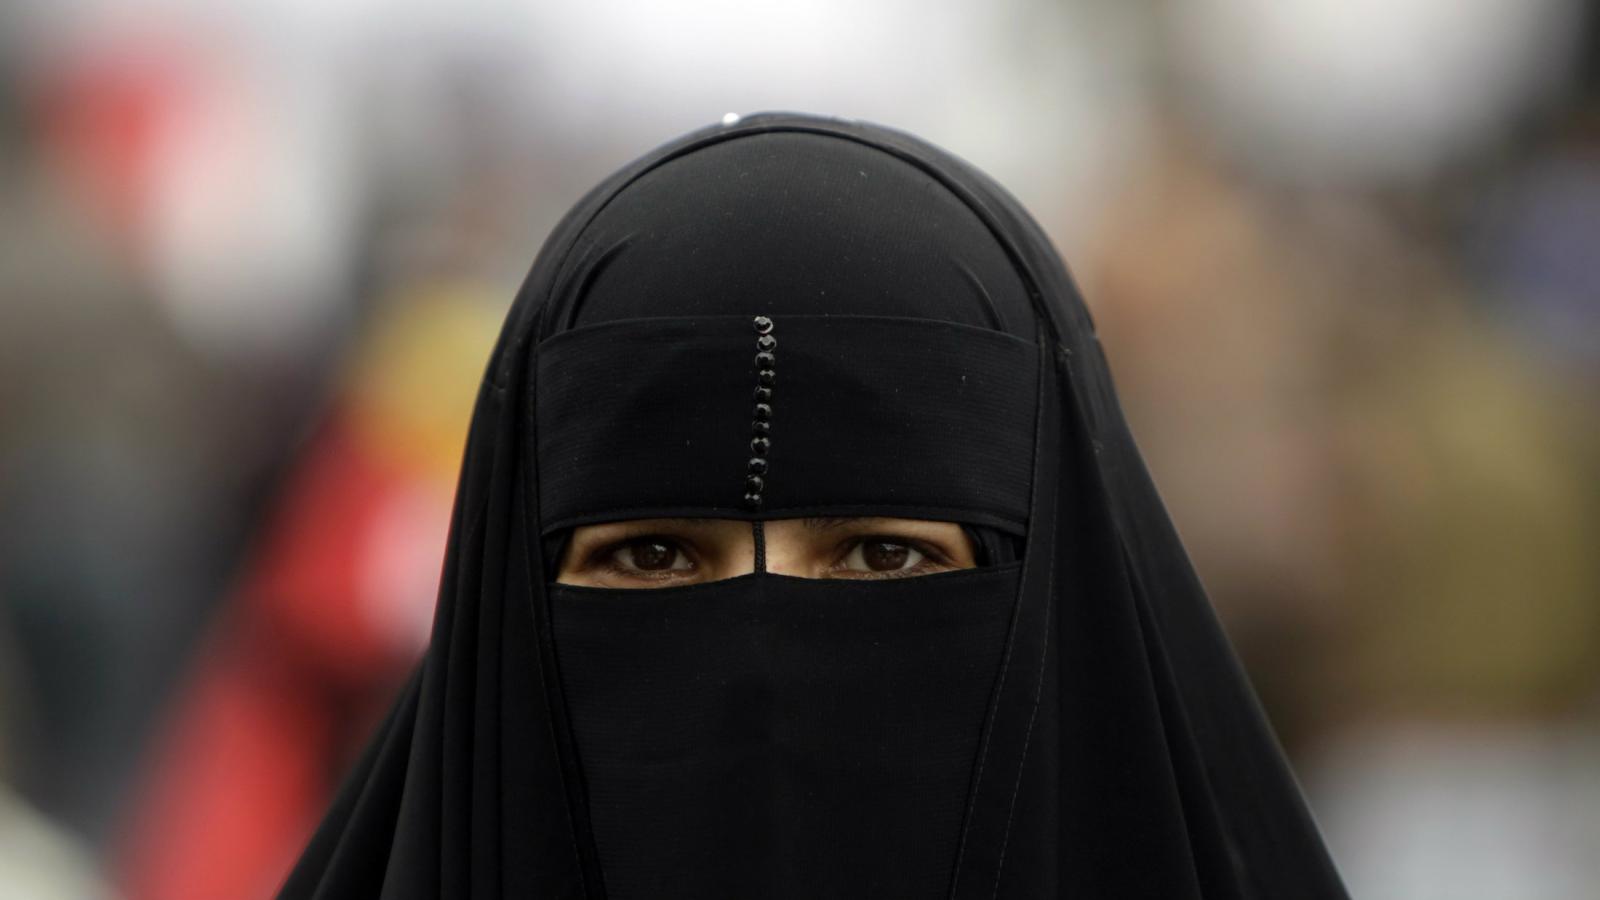 Egyptian lawmakers want to ban Muslim women from covering their faces